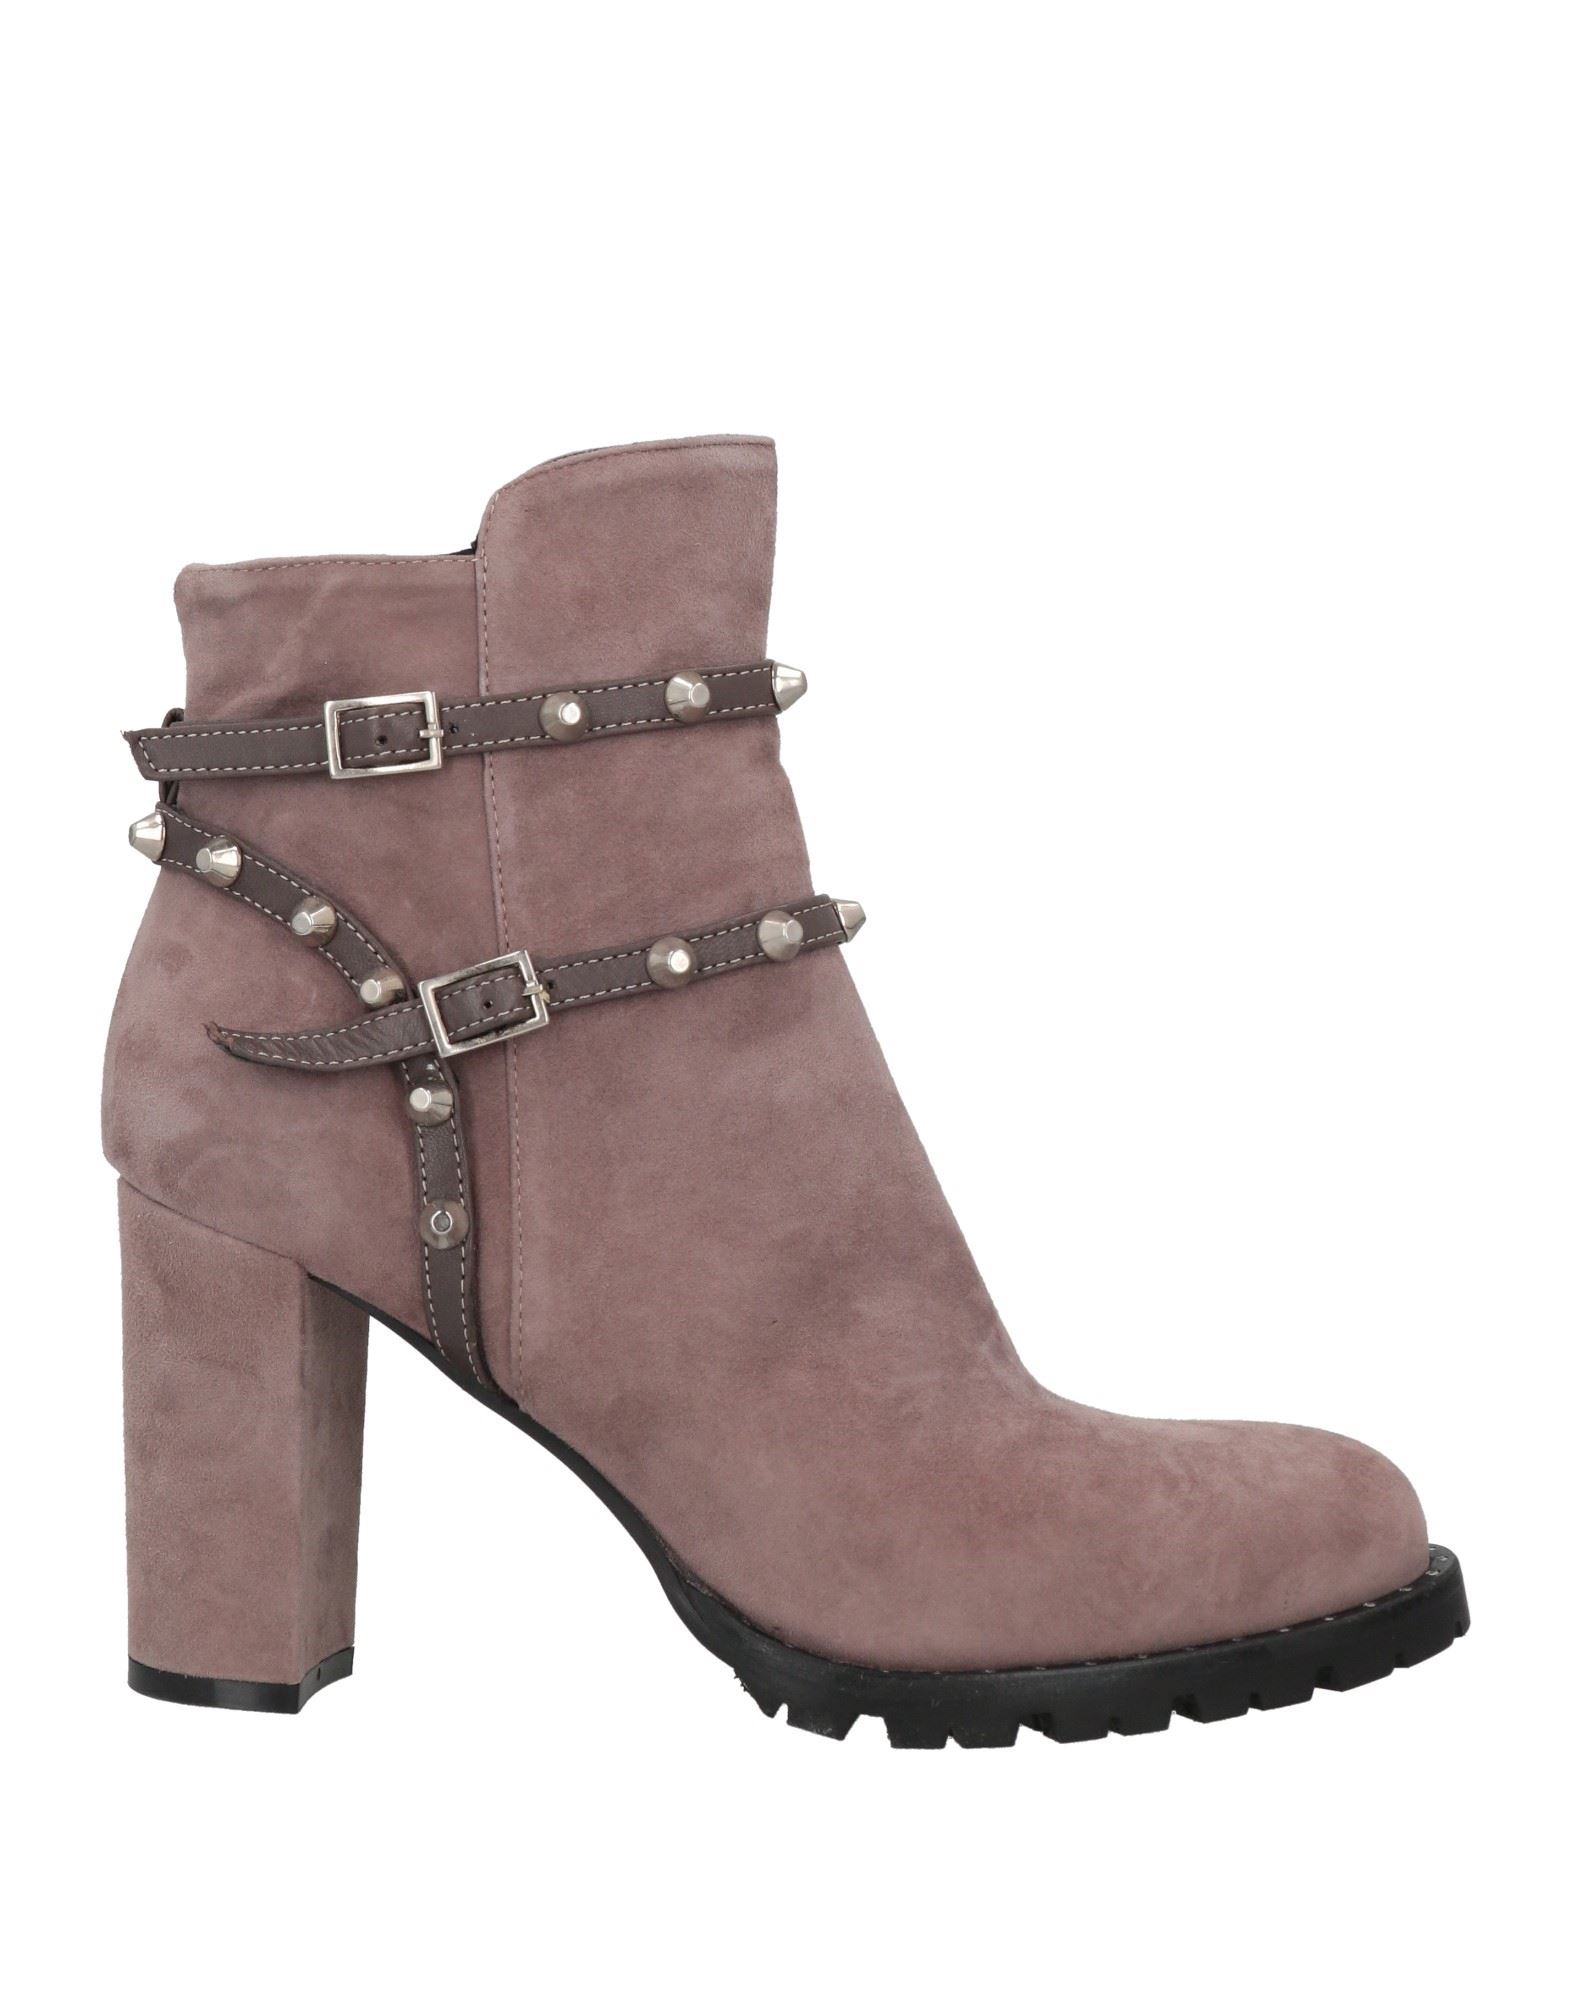 Luxury Ankle Boots In Beige